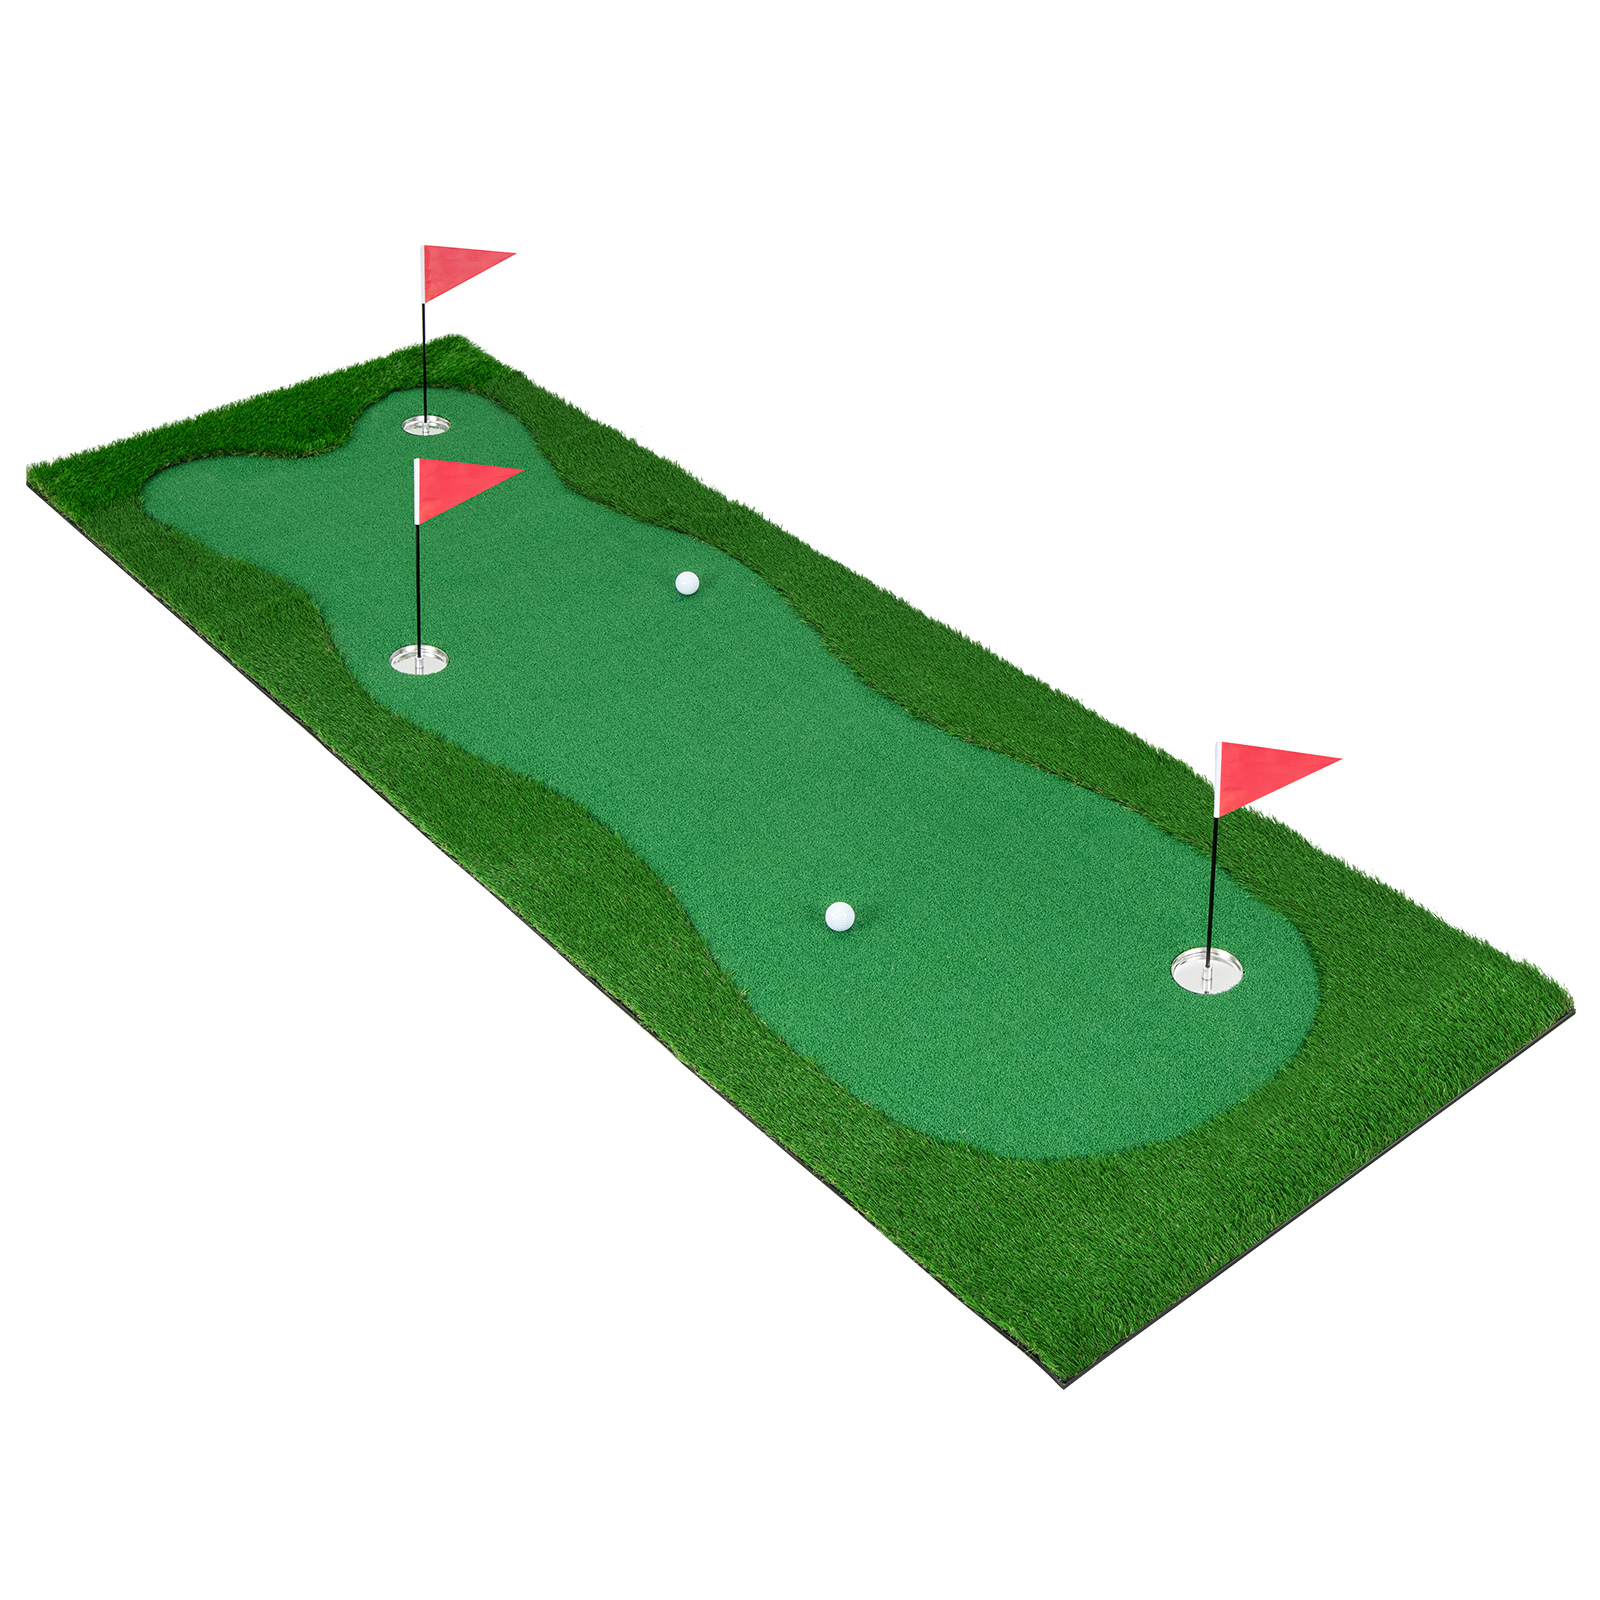 10_x_3.3_FT_Golf_Putting_Green_Practice_Mat_with_3_Holes-3.jpg